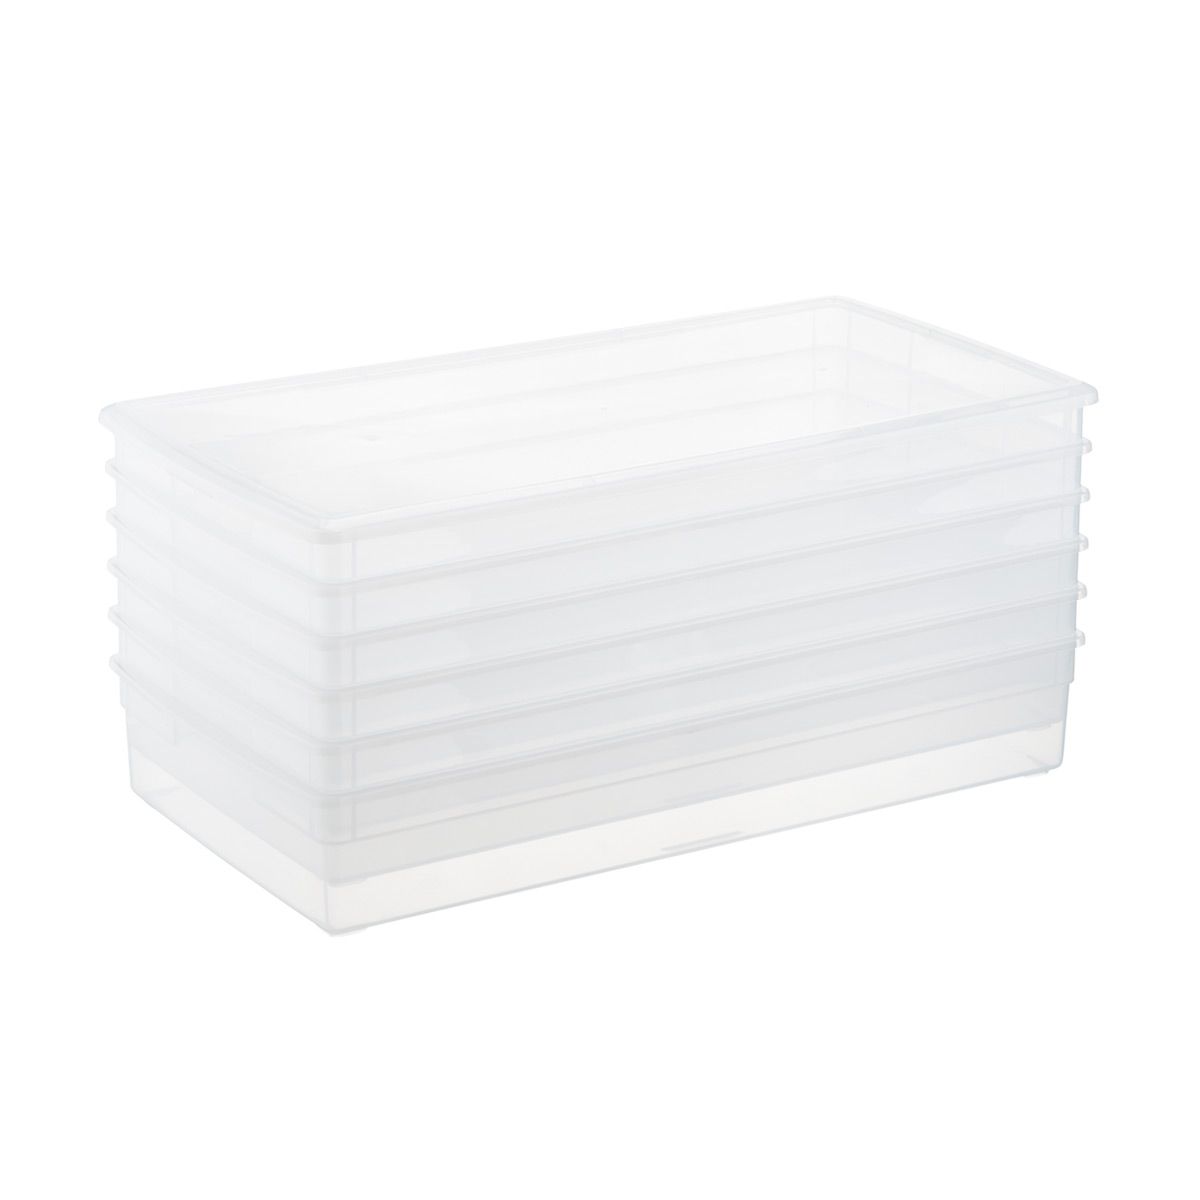 Case of 6 Our Long Underbed Boxes | The Container Store